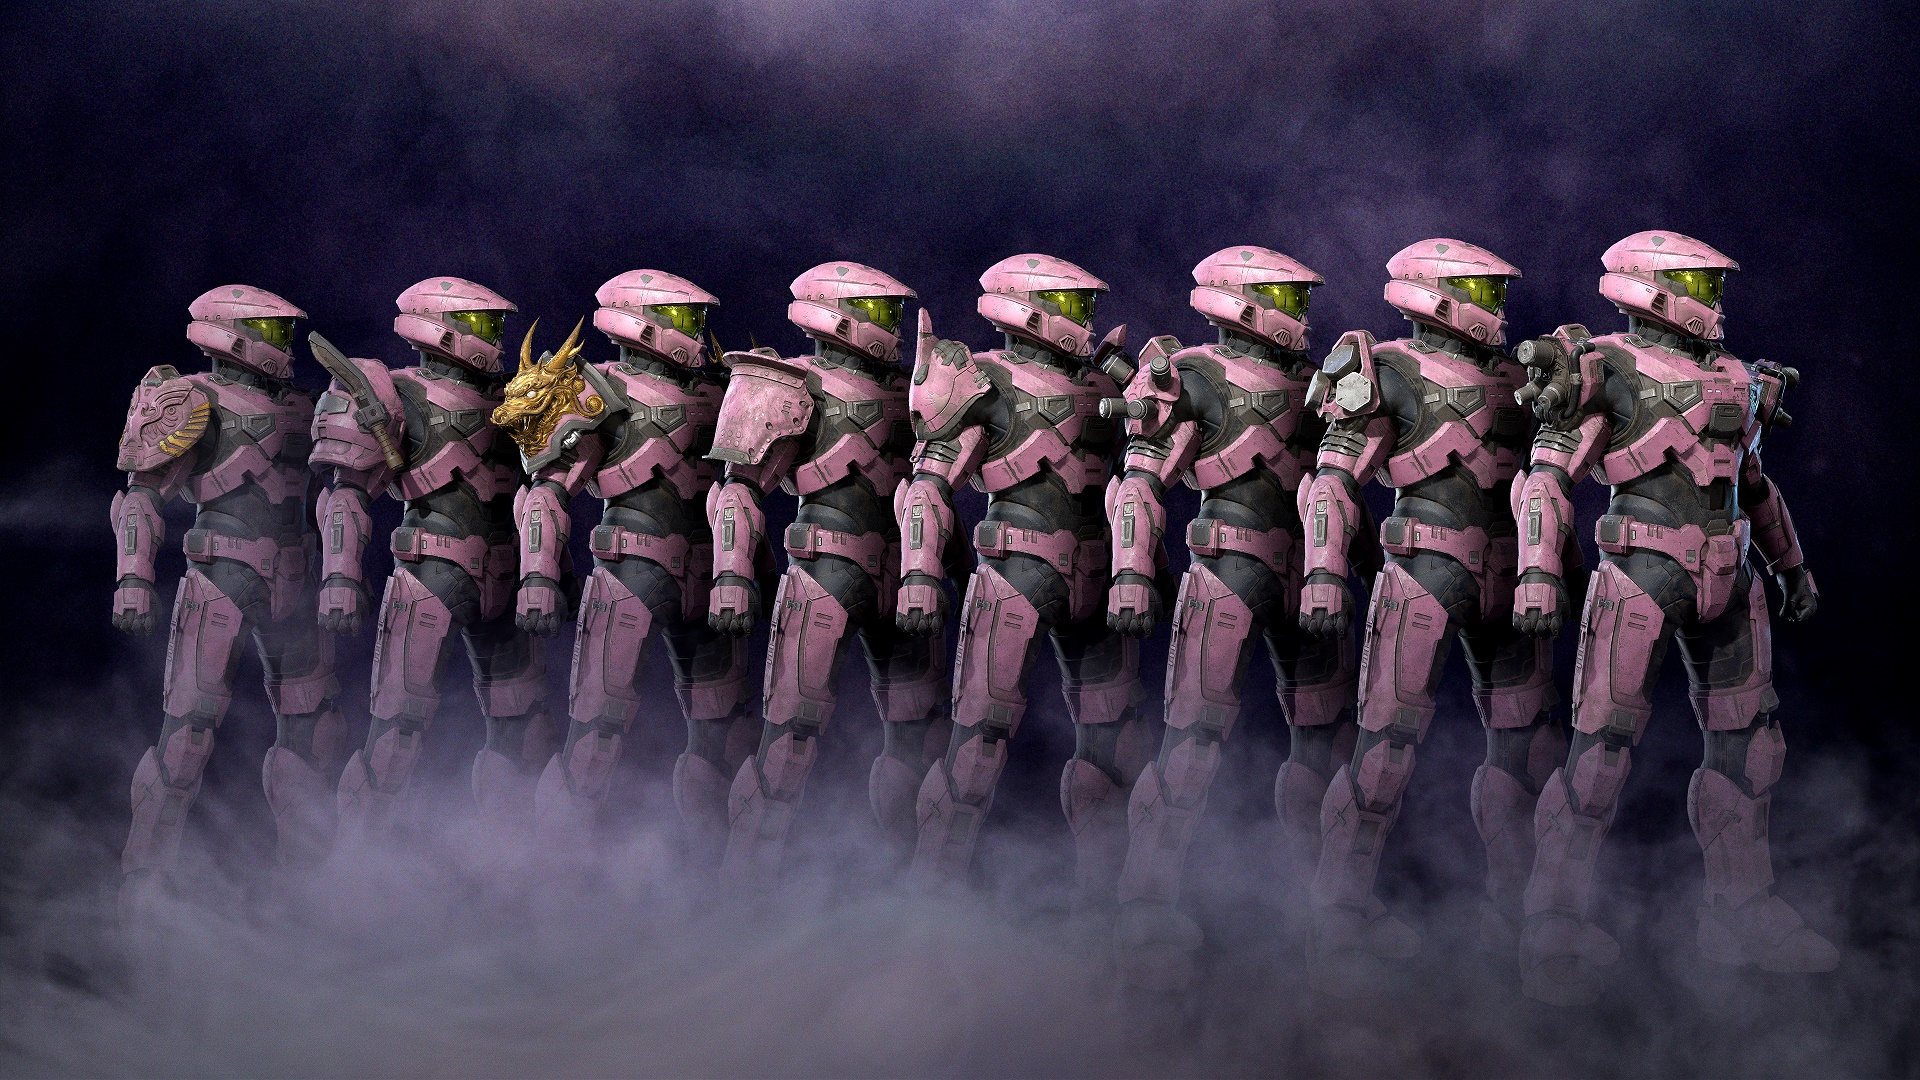 Halo Infinite image showcasing various Armor Cores with multi-use shoulder pads